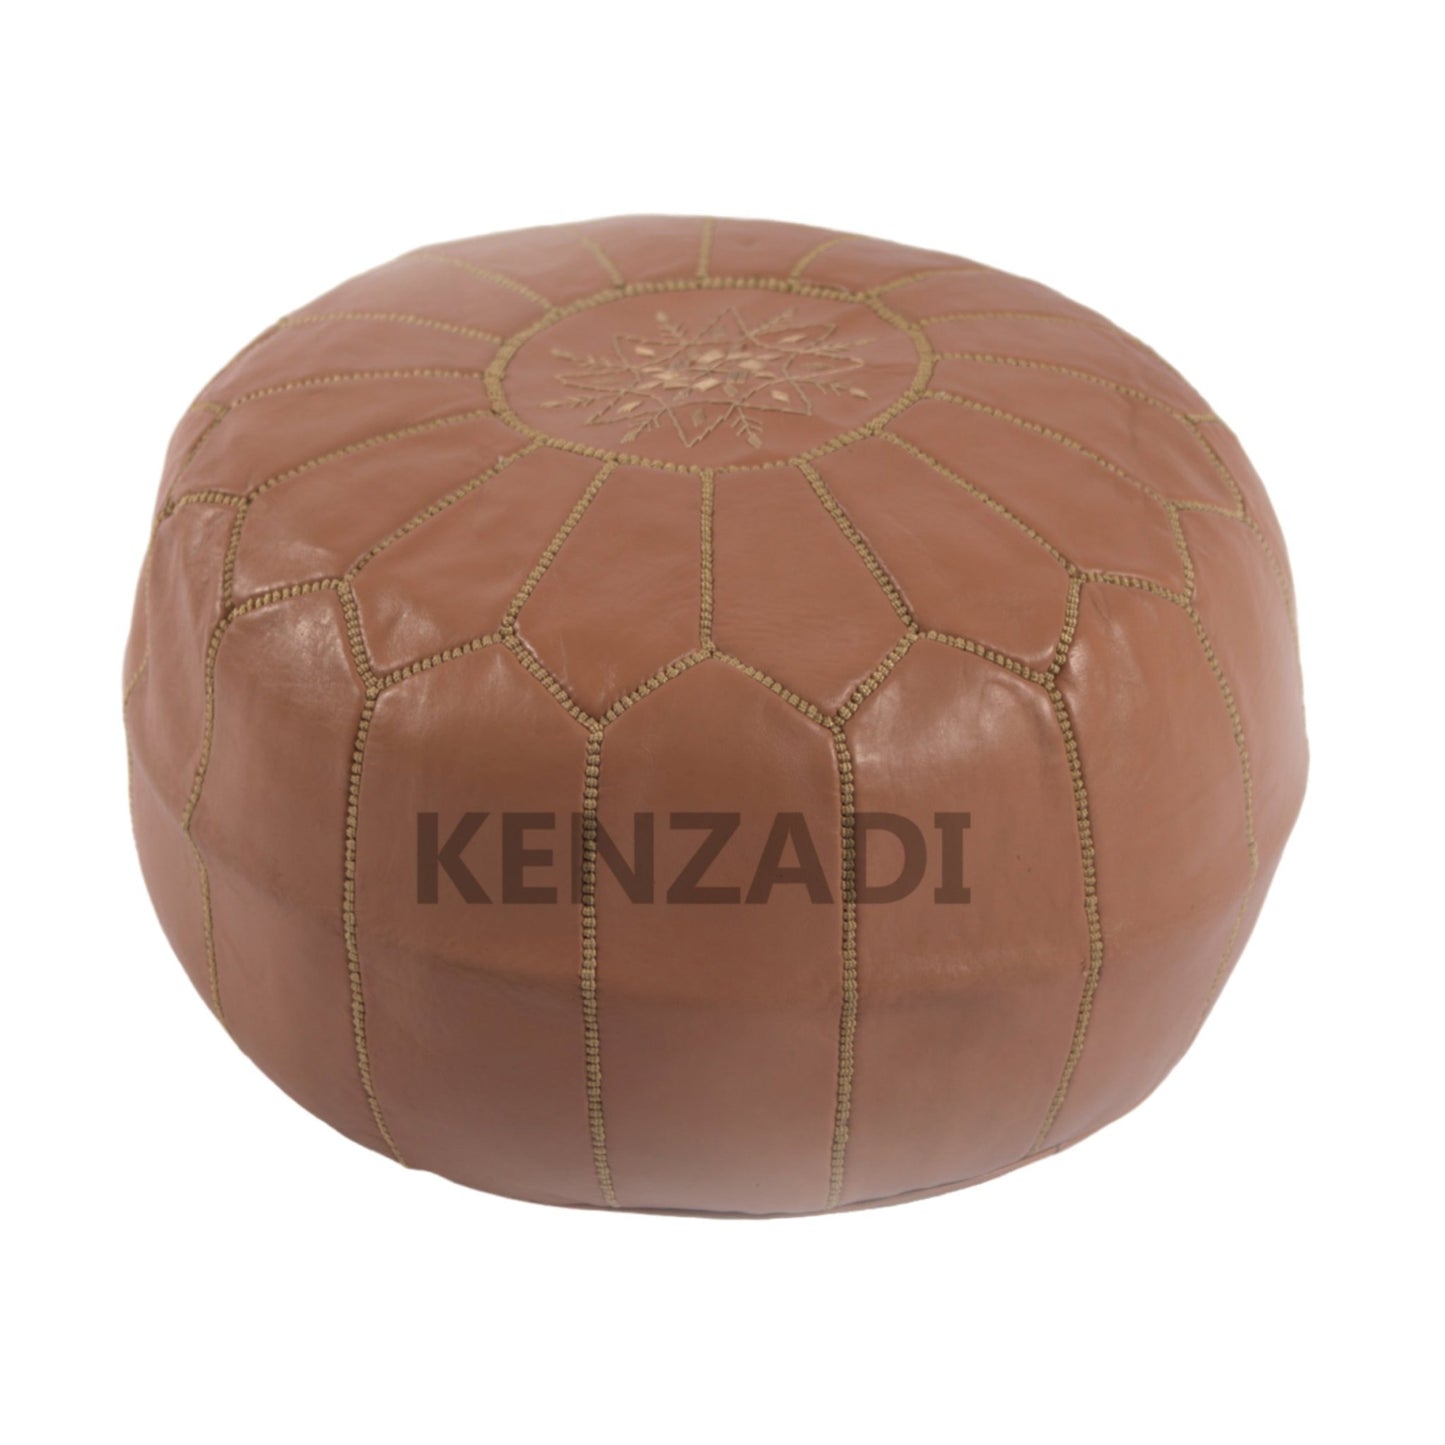 Moroccan leather pouf, round pouf, berber pouf, bright brown pouf with beige embroidery by Kenzadi - Handmade by My Poufs